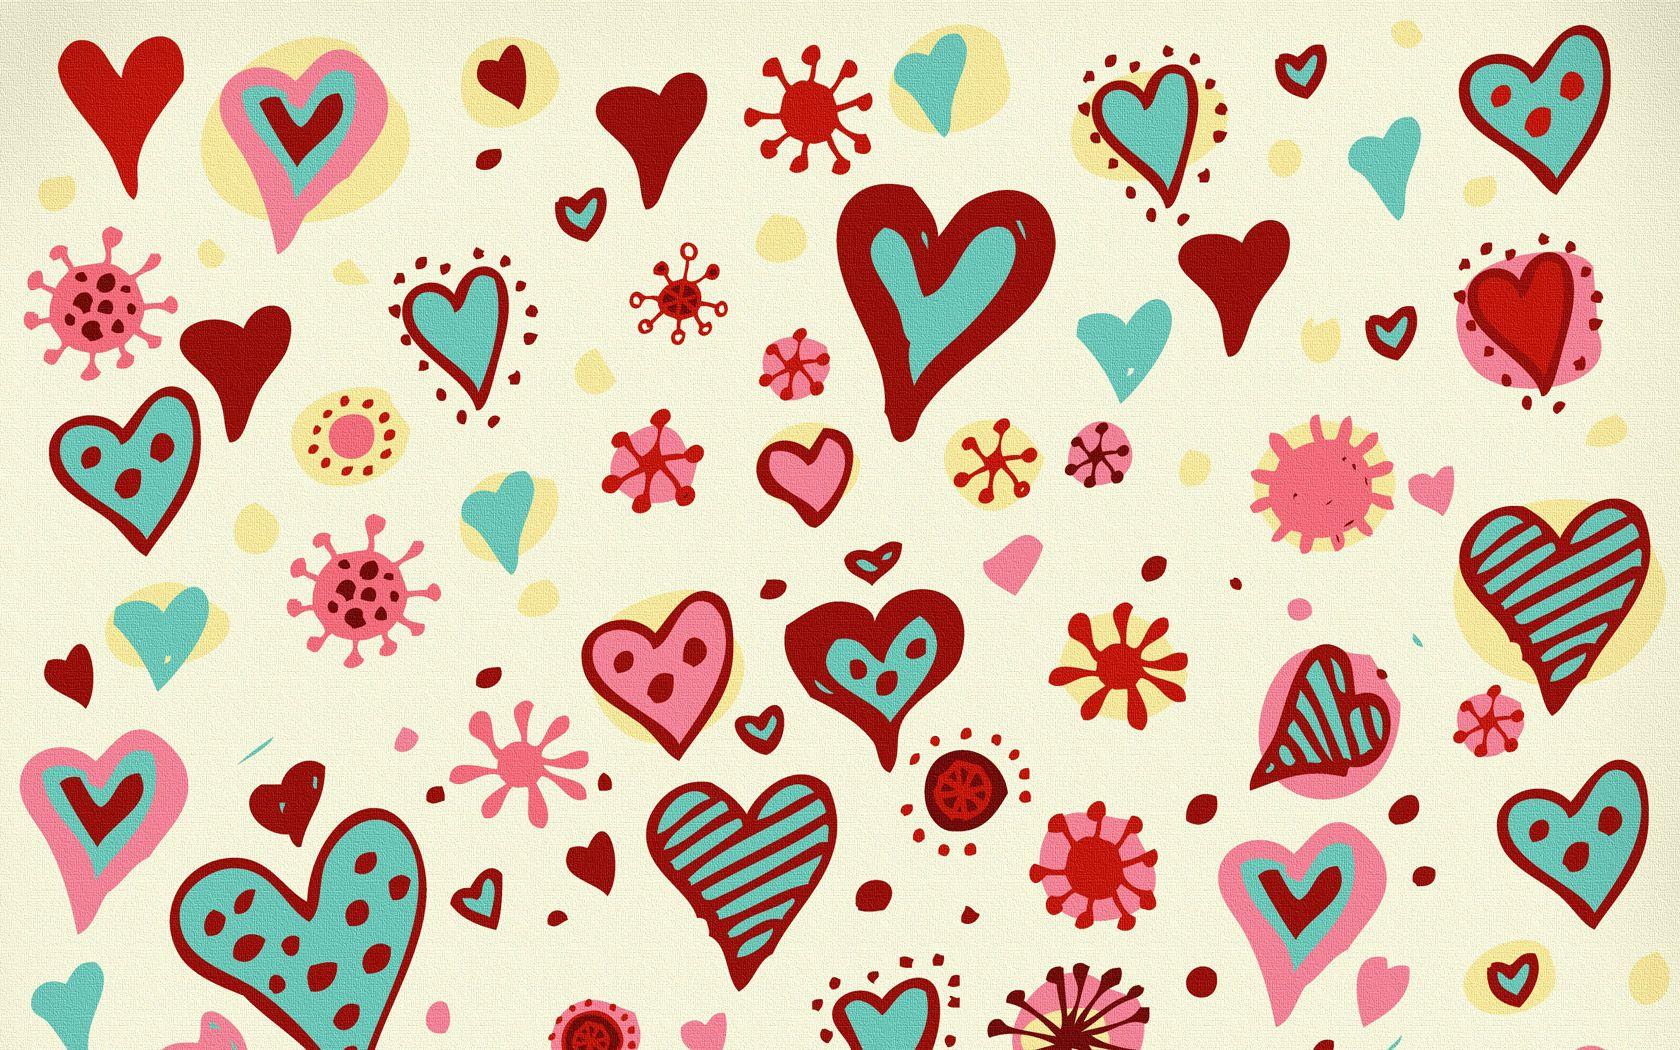 Hearts wallpaper and image, picture, photo